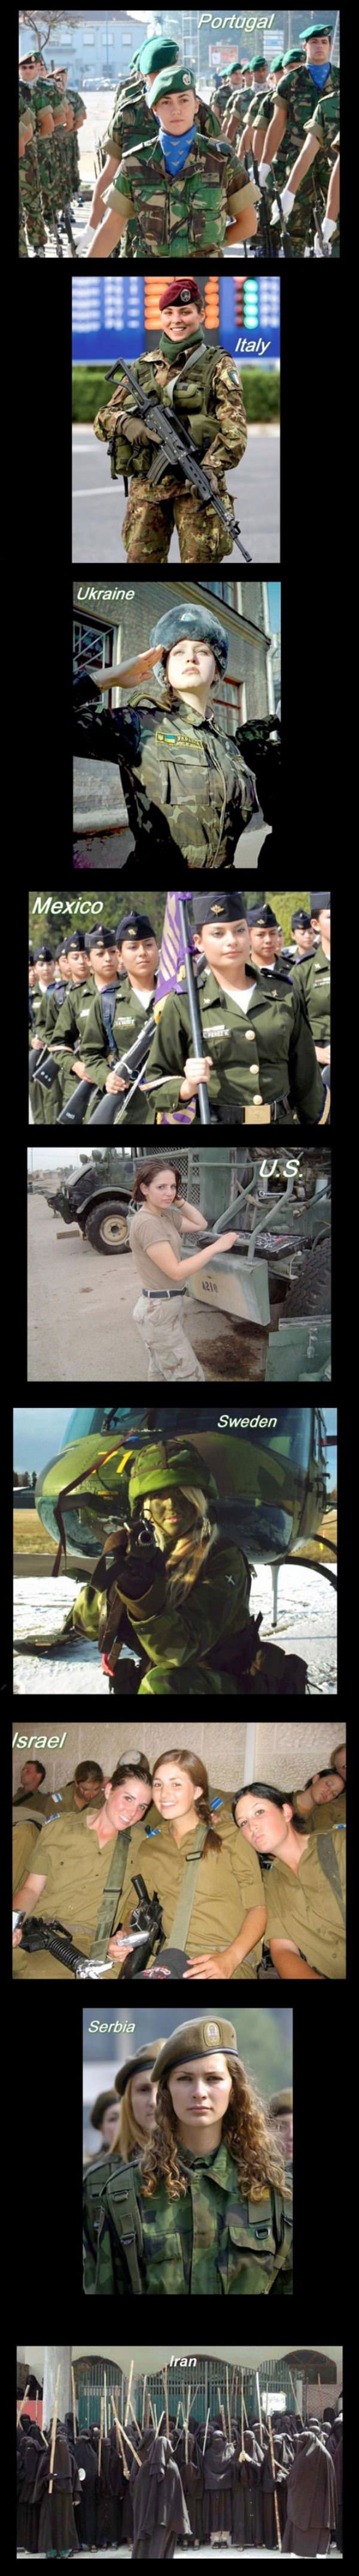 Women In The Military